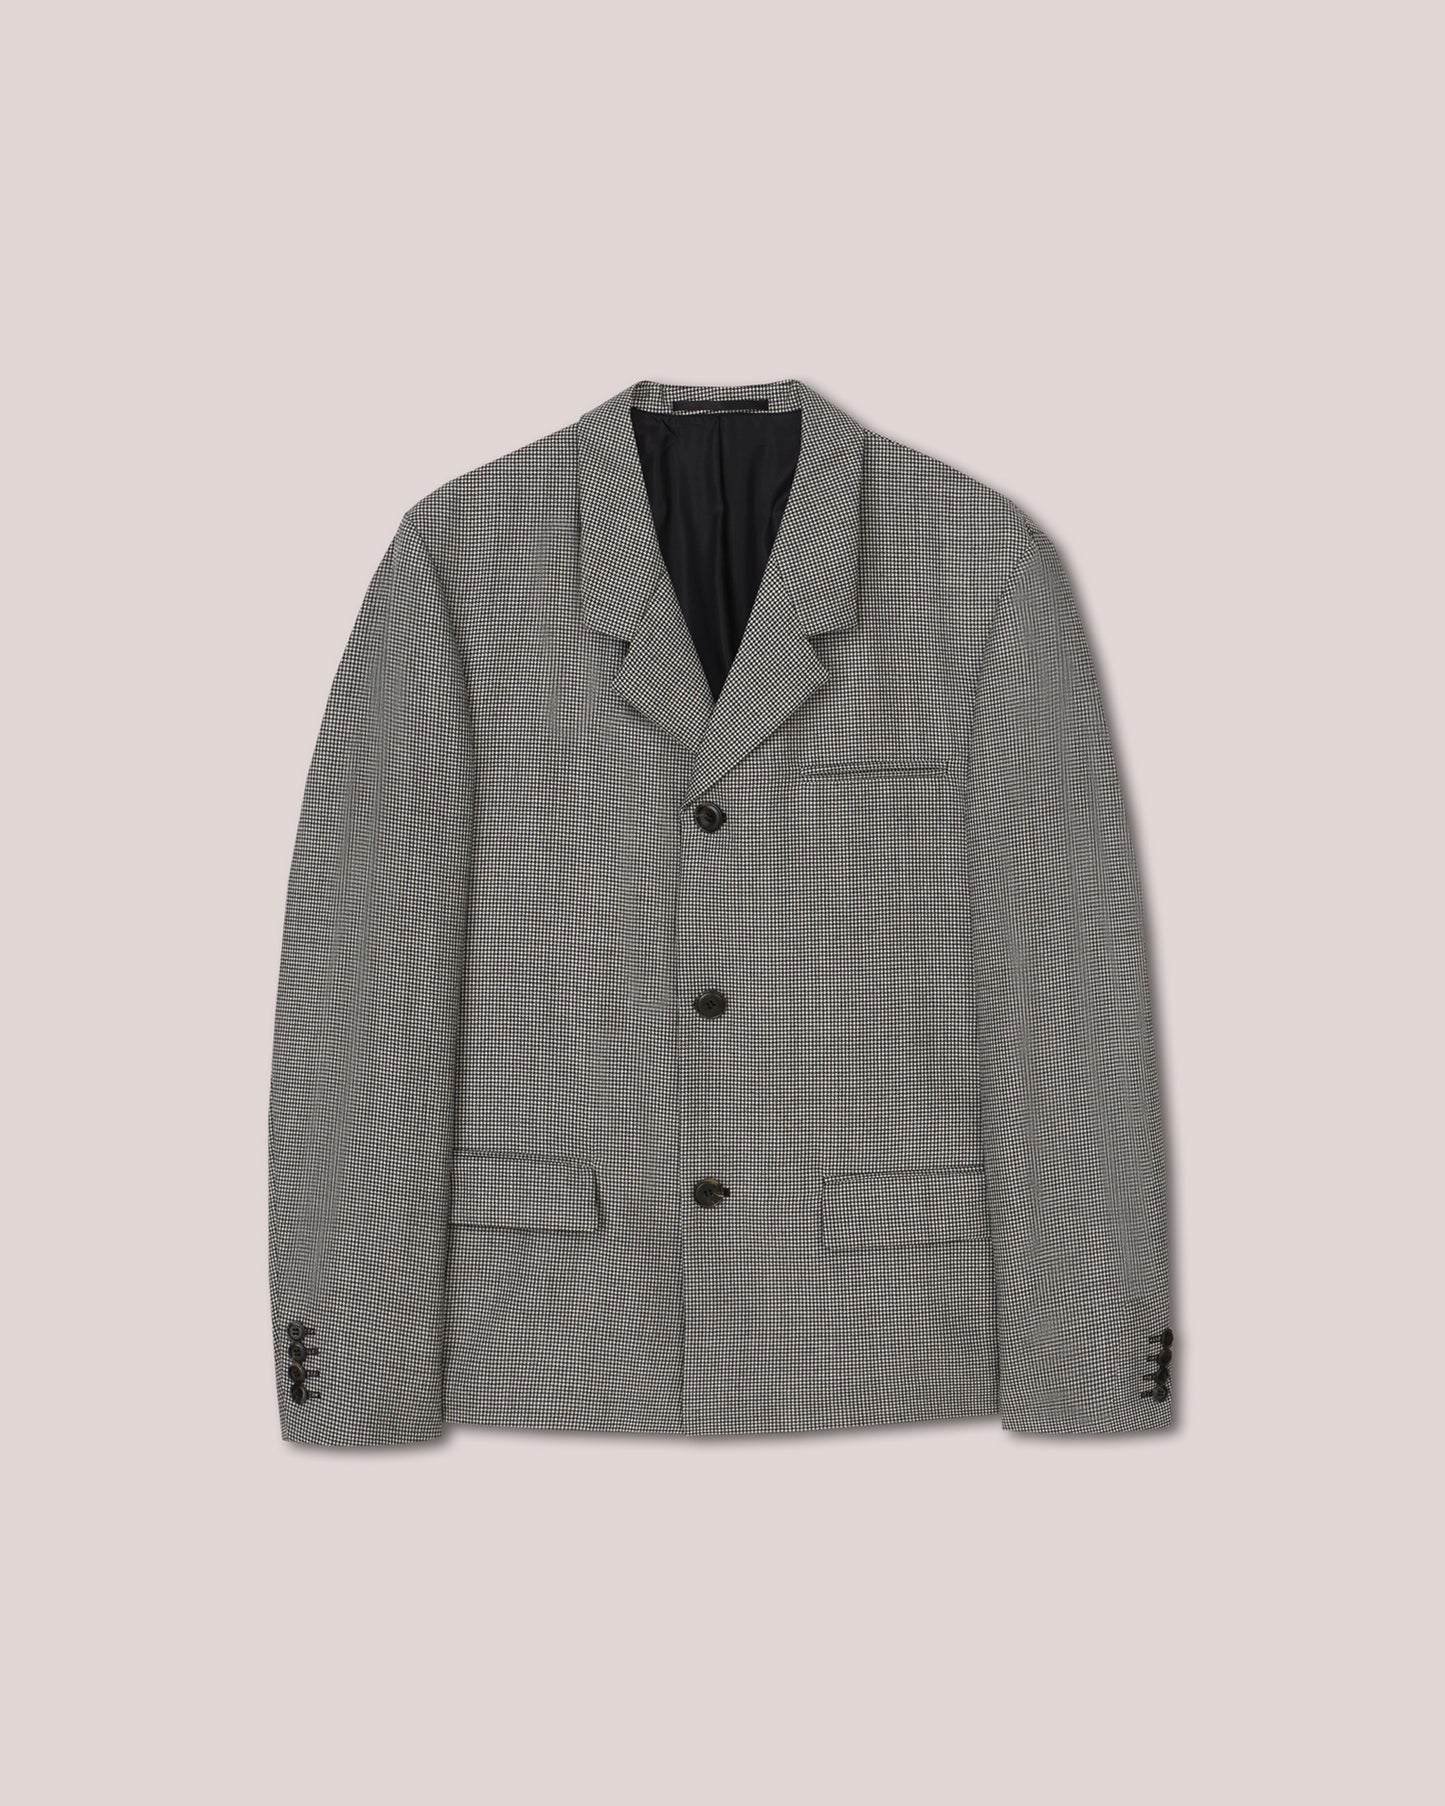 Rox - Single Breasted Suit Jacket - Light Grey